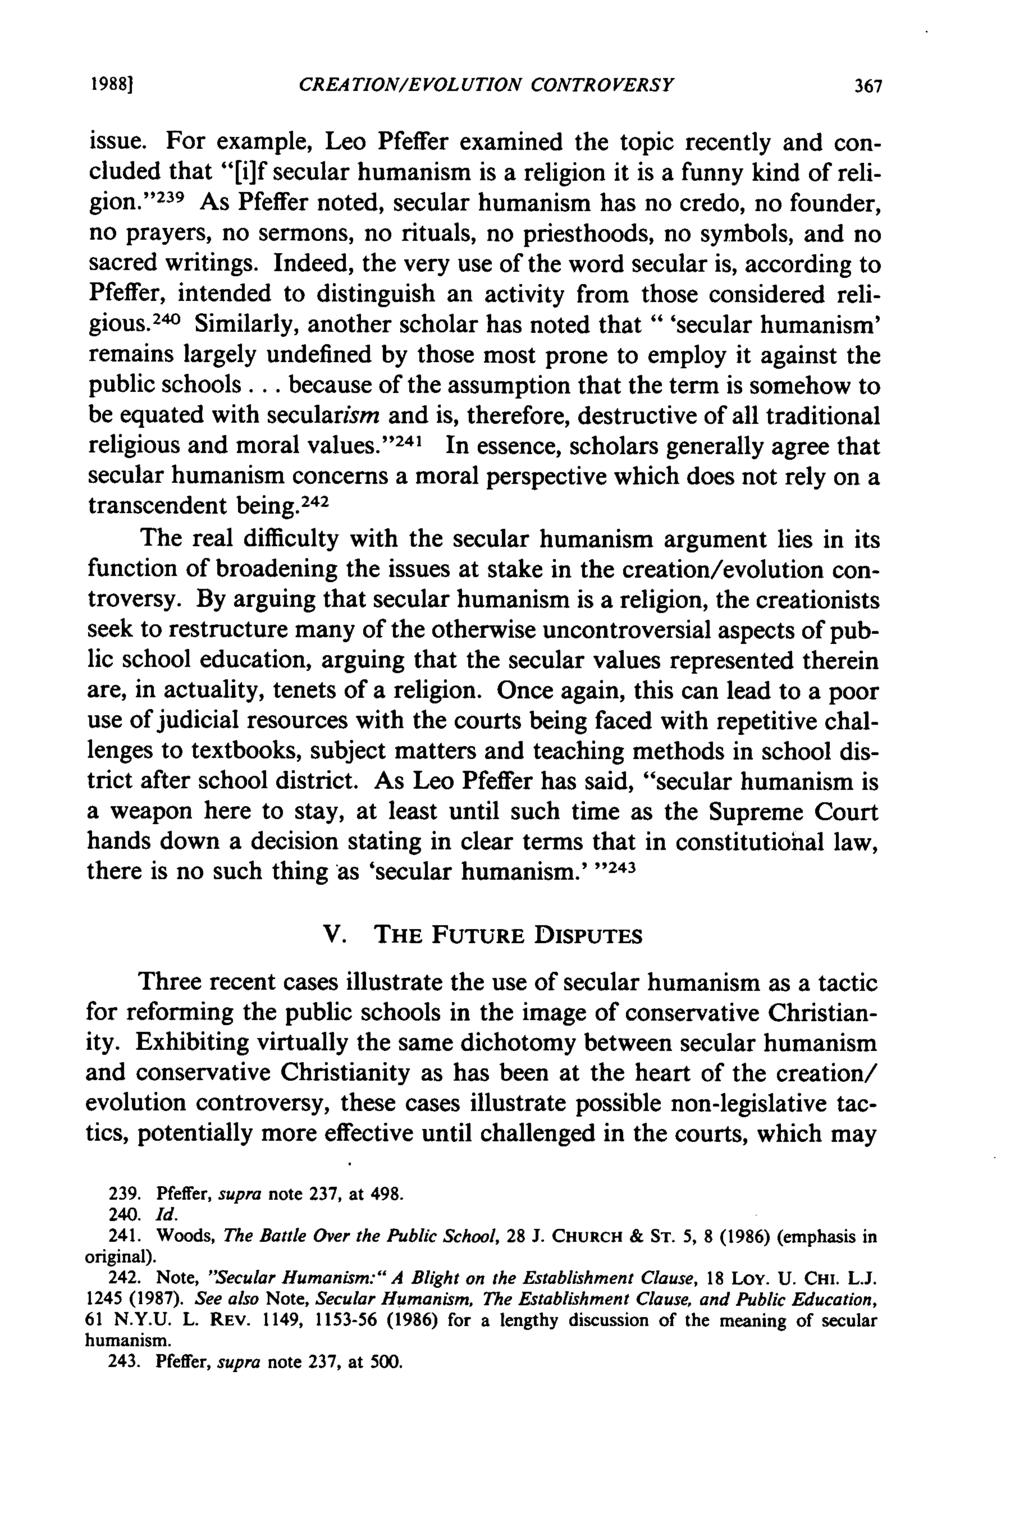 19s881 CREATION/EVOLUTION CONTROVERSY issue. For example, Leo Pfeffer examined the topic recently and concluded that "[i]f secular humanism is a religion it is a funny kind of religion.